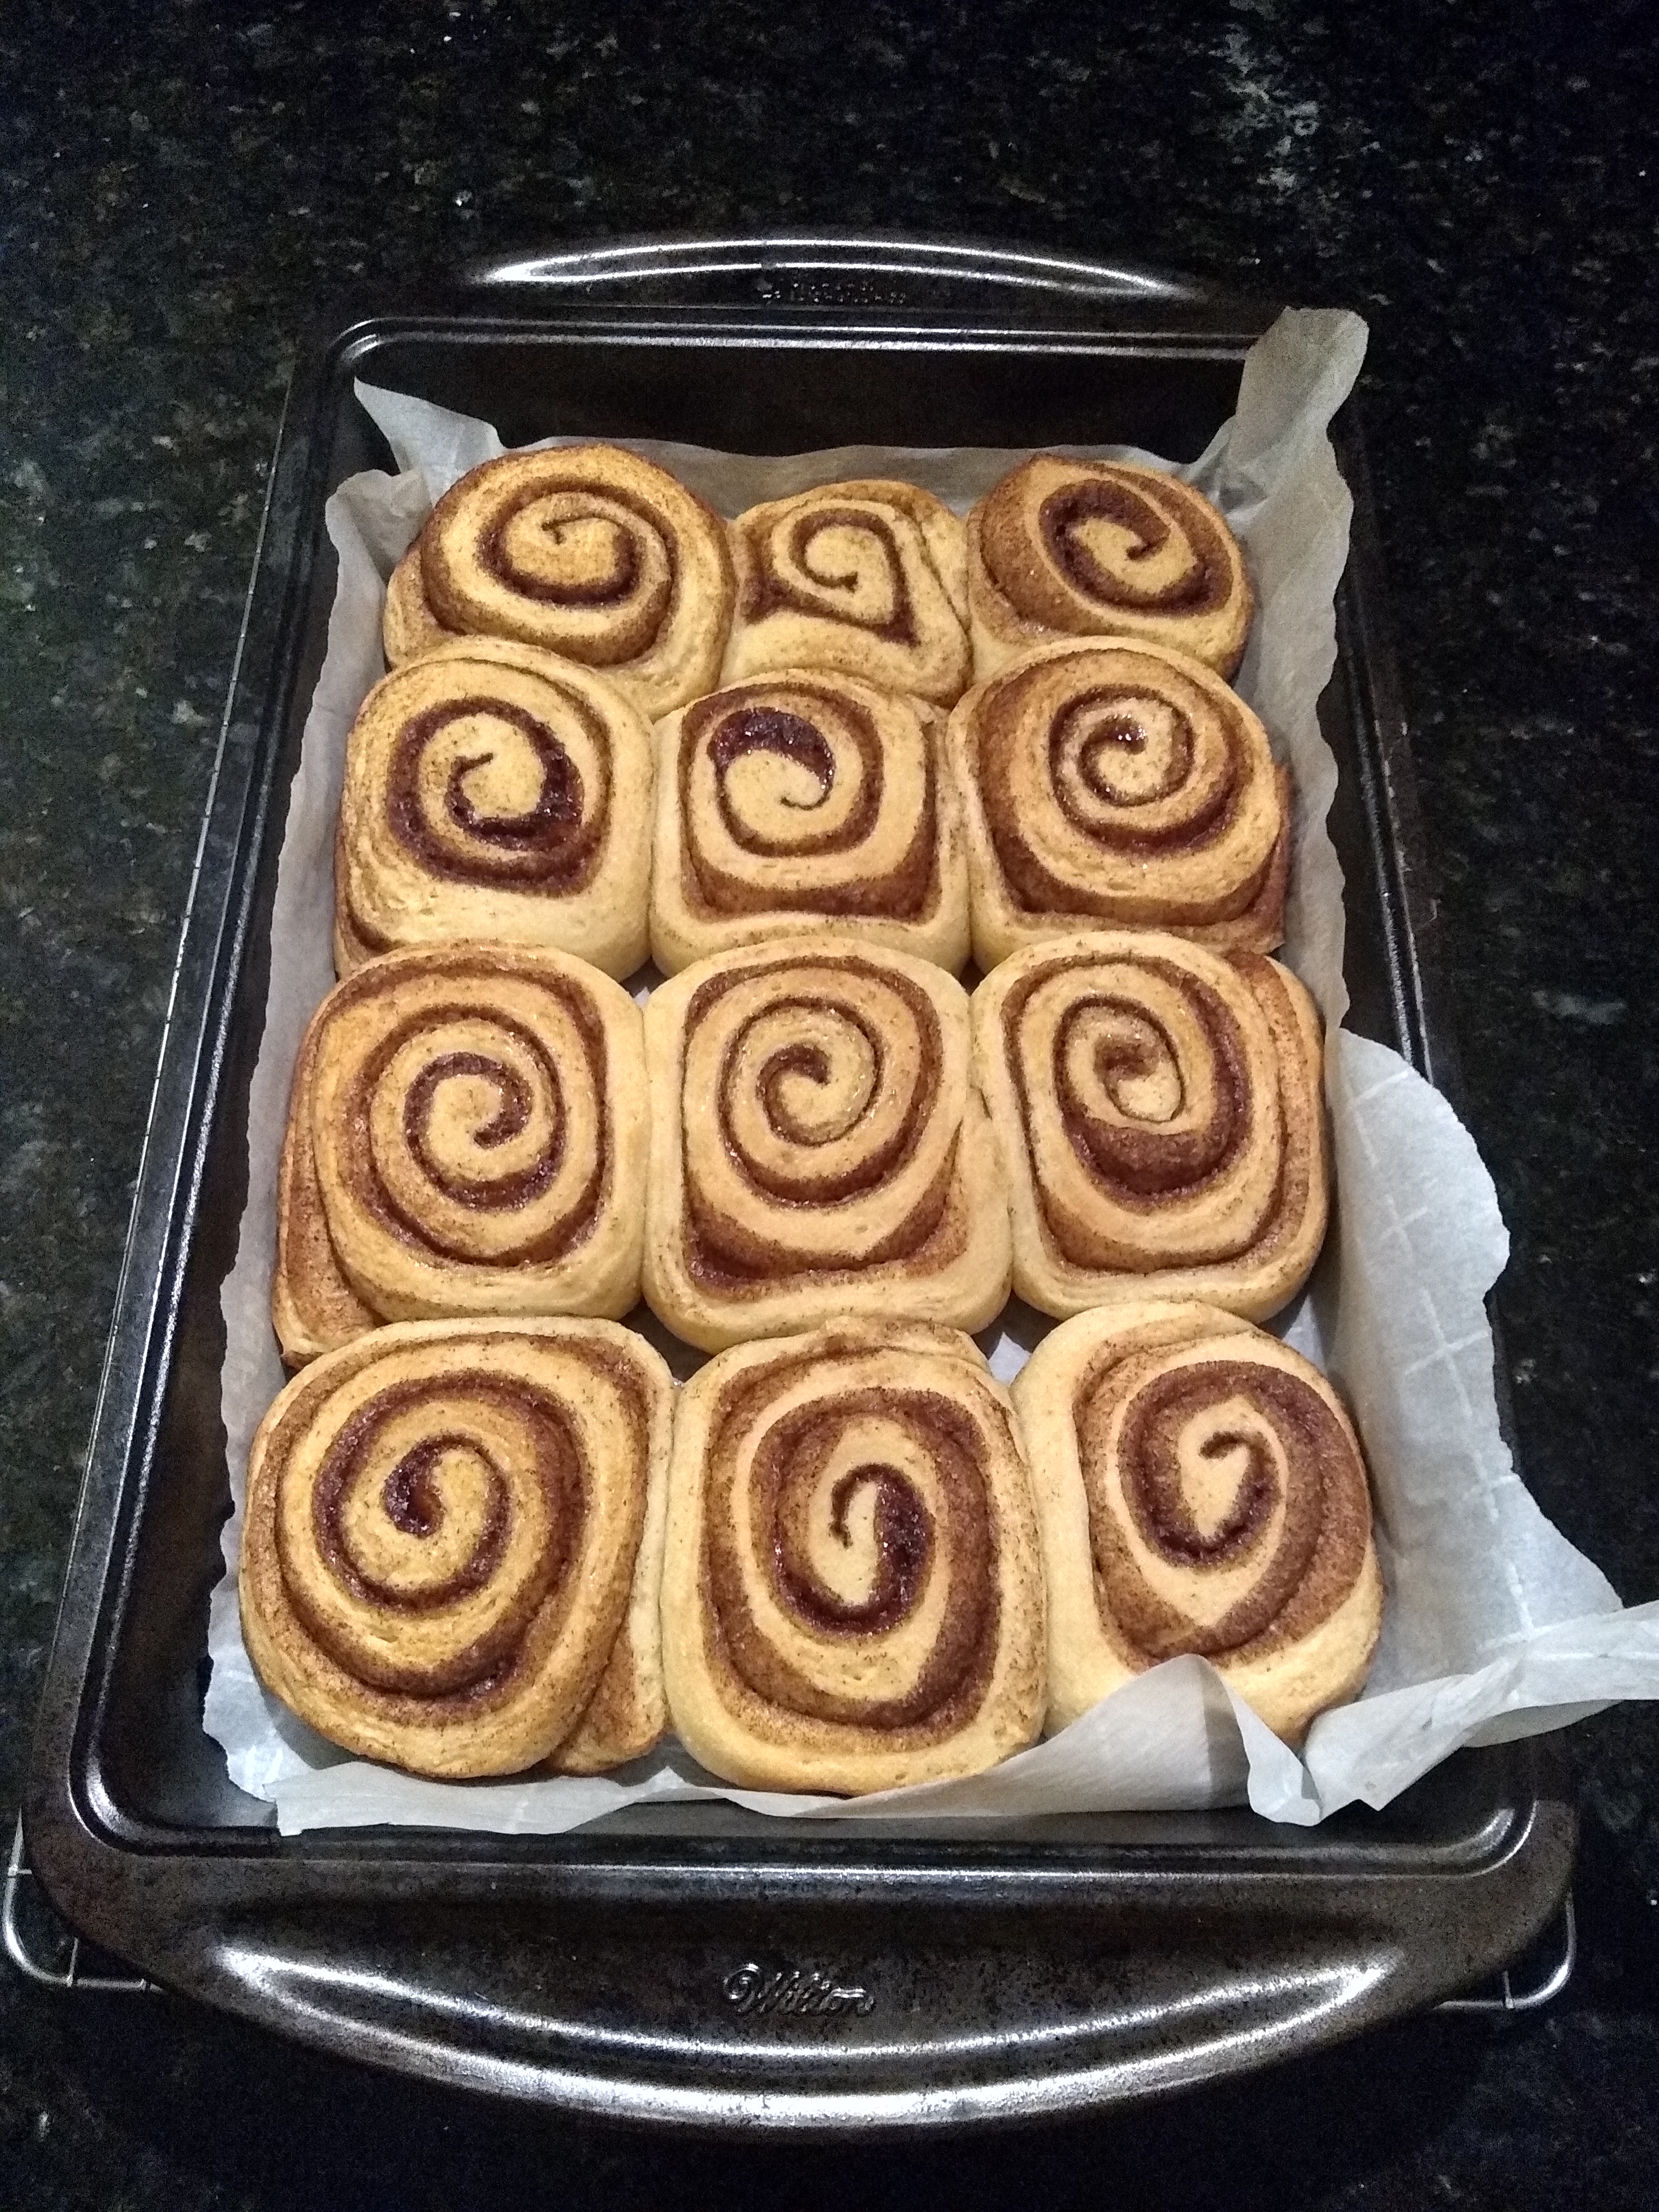 Cinnamon buns proofing in a baking tray